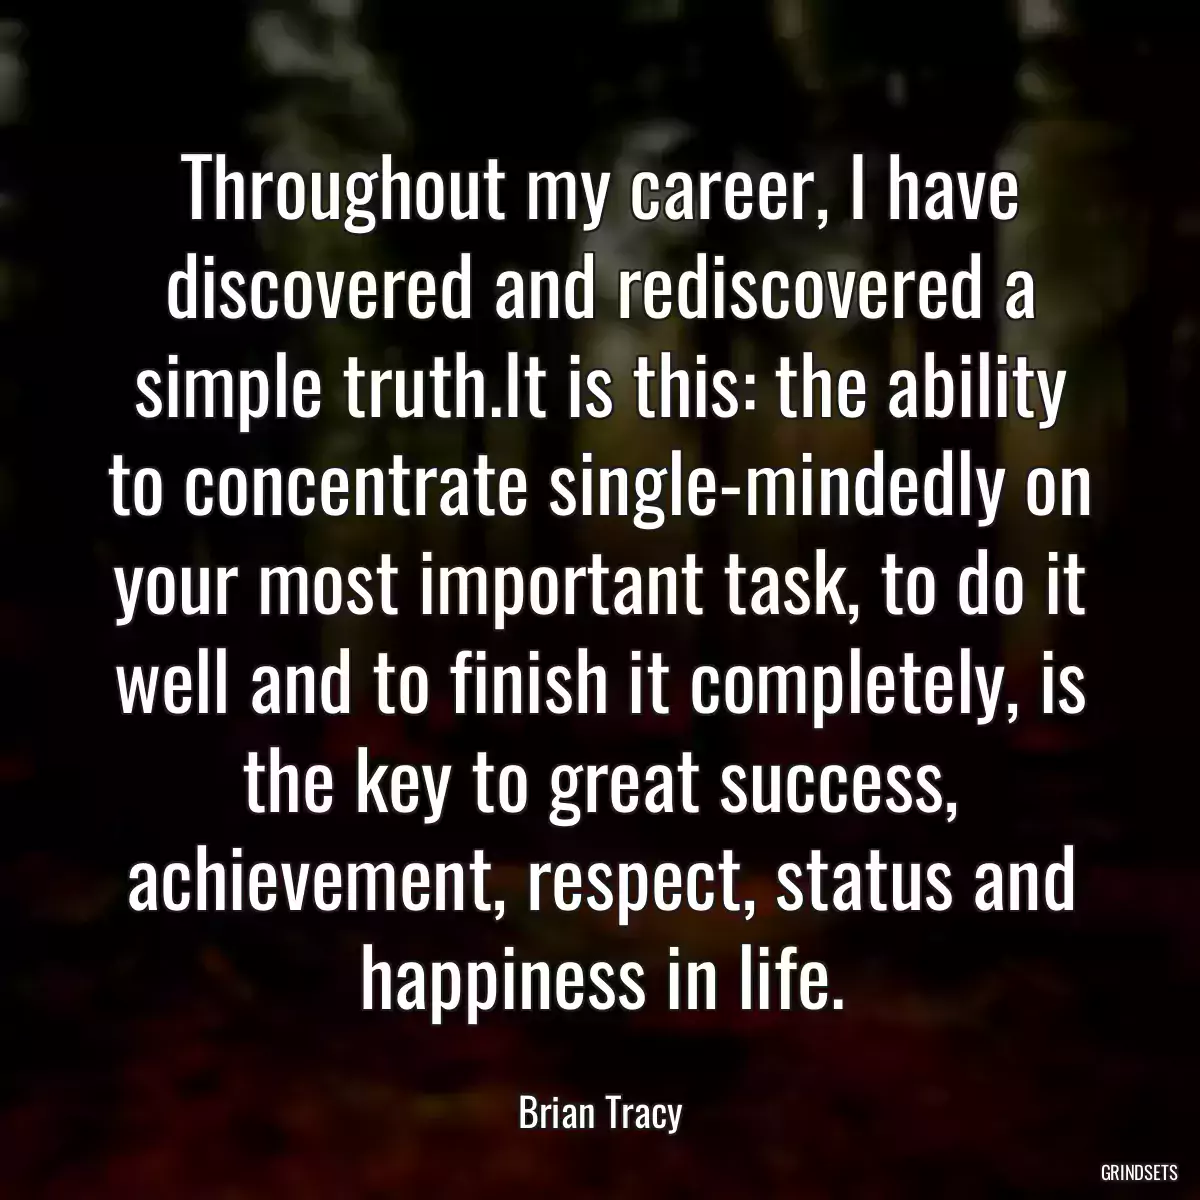 Throughout my career, I have discovered and rediscovered a simple truth.It is this: the ability to concentrate single-mindedly on your most important task, to do it well and to finish it completely, is the key to great success, achievement, respect, status and happiness in life.